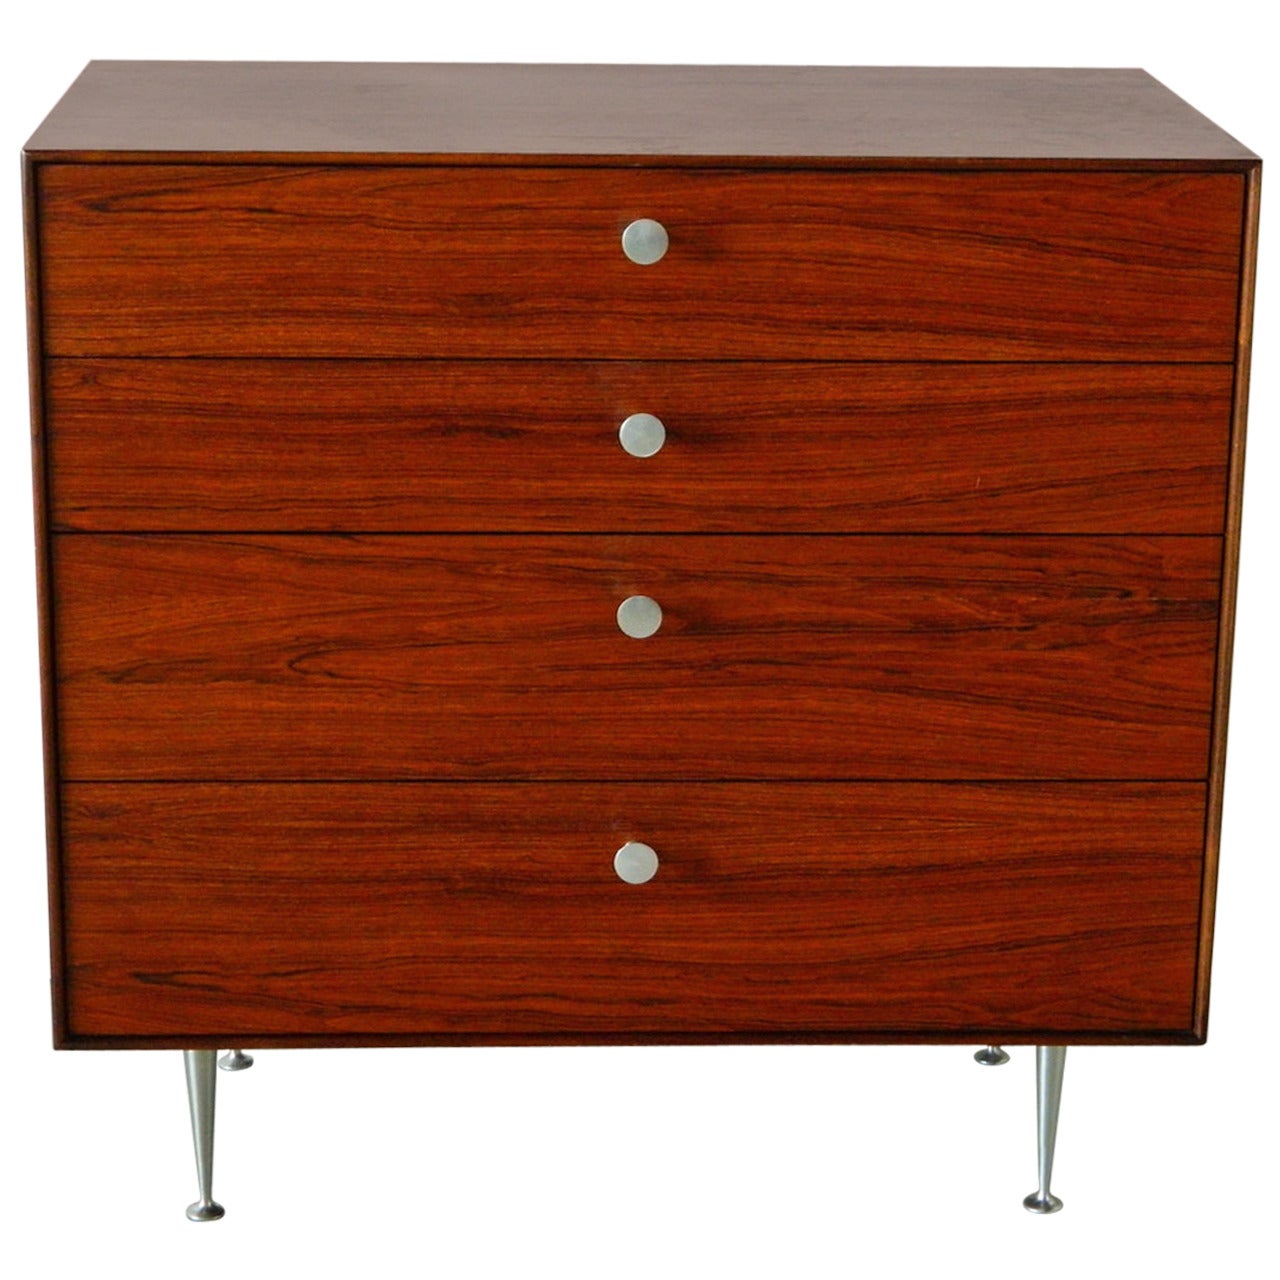 George Nelson Thin Edge Rosewood Chest